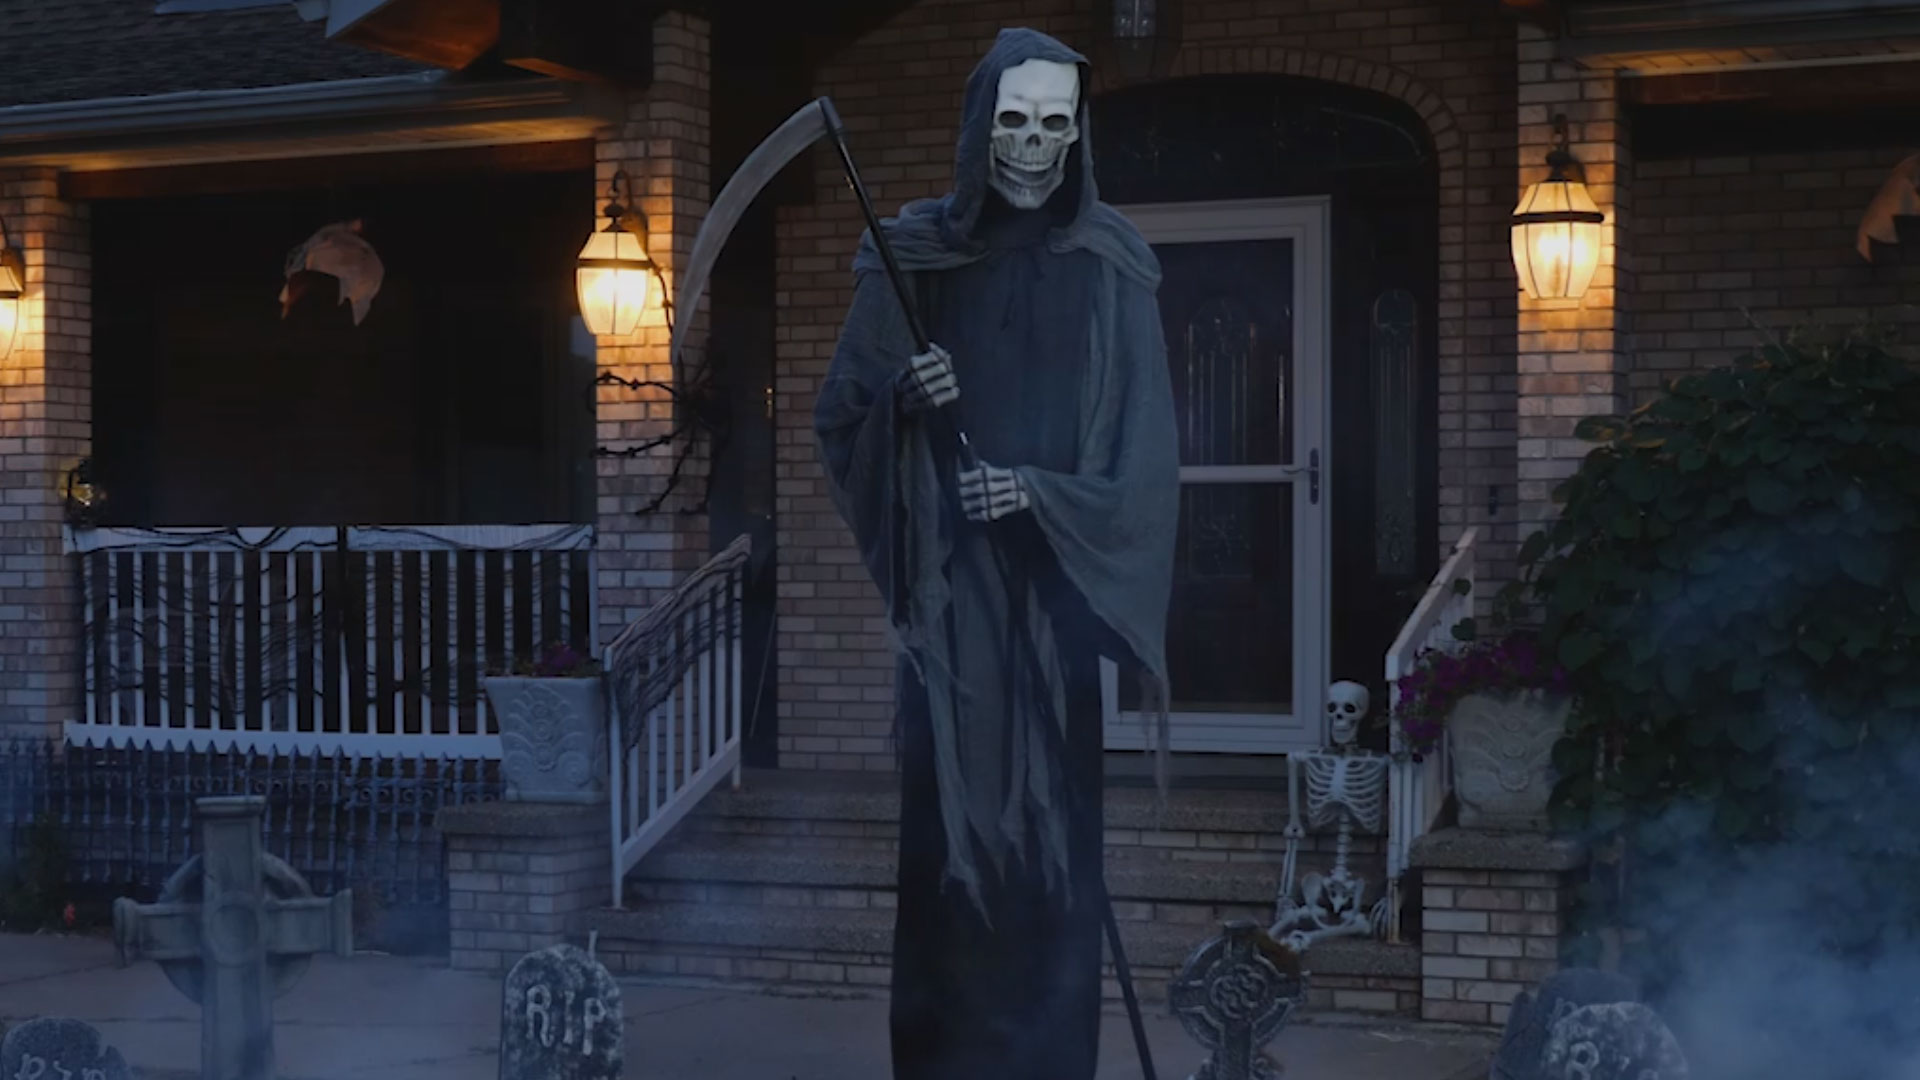 Be careful where you step, because this 9ft Giant Animated Scythe Reaper is waiting for you! Scare friends, family, and trick-or-treaters with this towering step-activated Halloween prop.